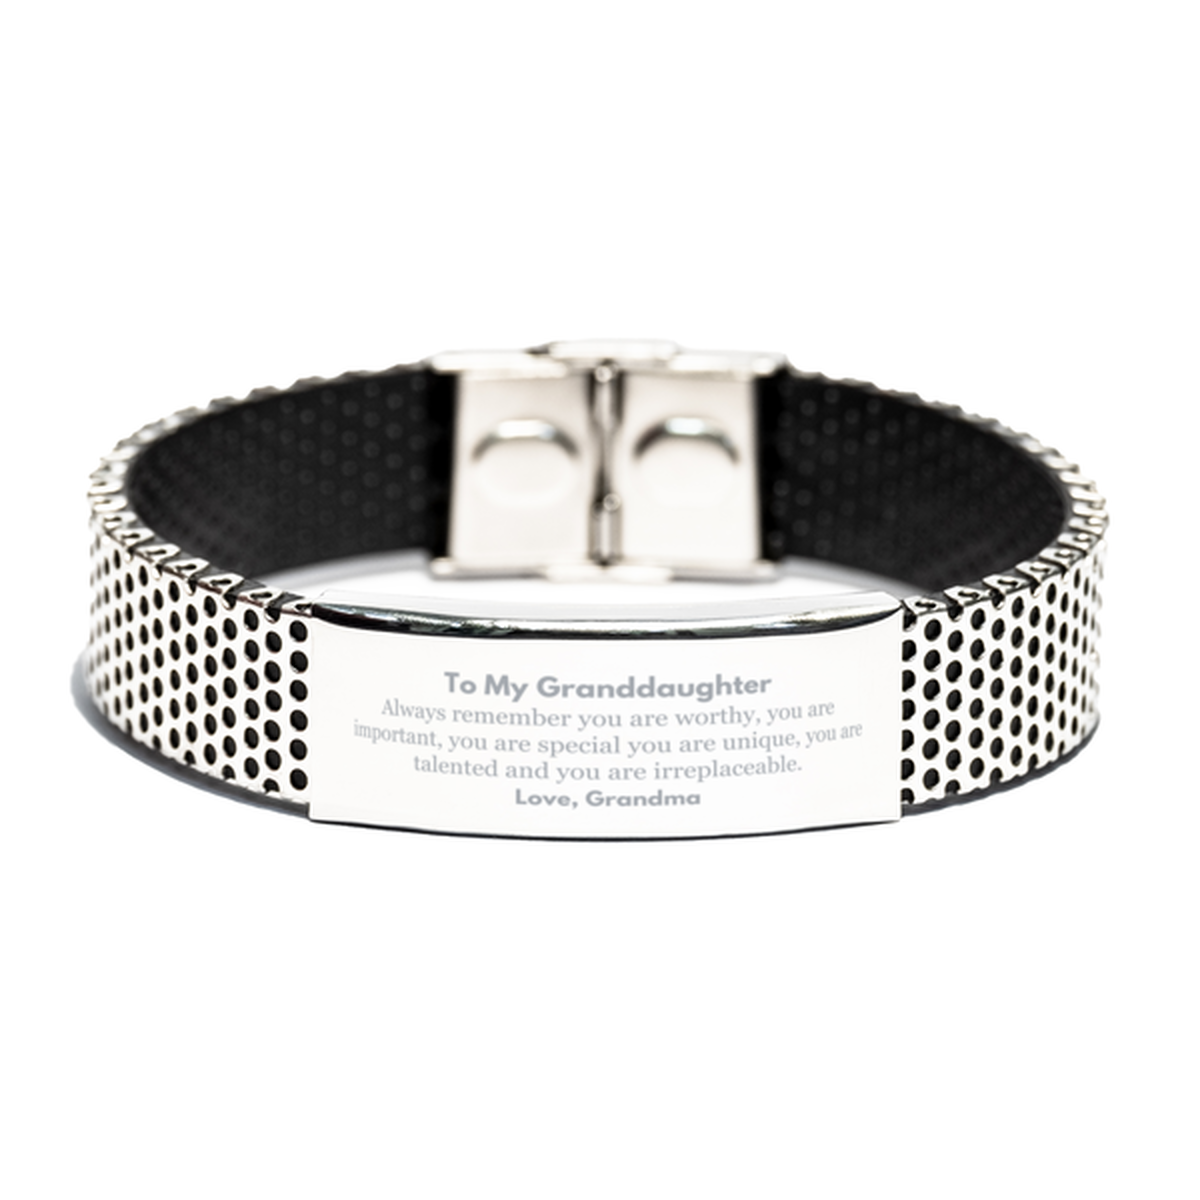 Granddaughter Birthday Gifts from Grandma, Inspirational Stainless Steel Bracelet for Granddaughter Christmas Graduation Gifts for Granddaughter Always remember you are worthy, you are important. Love, Grandma